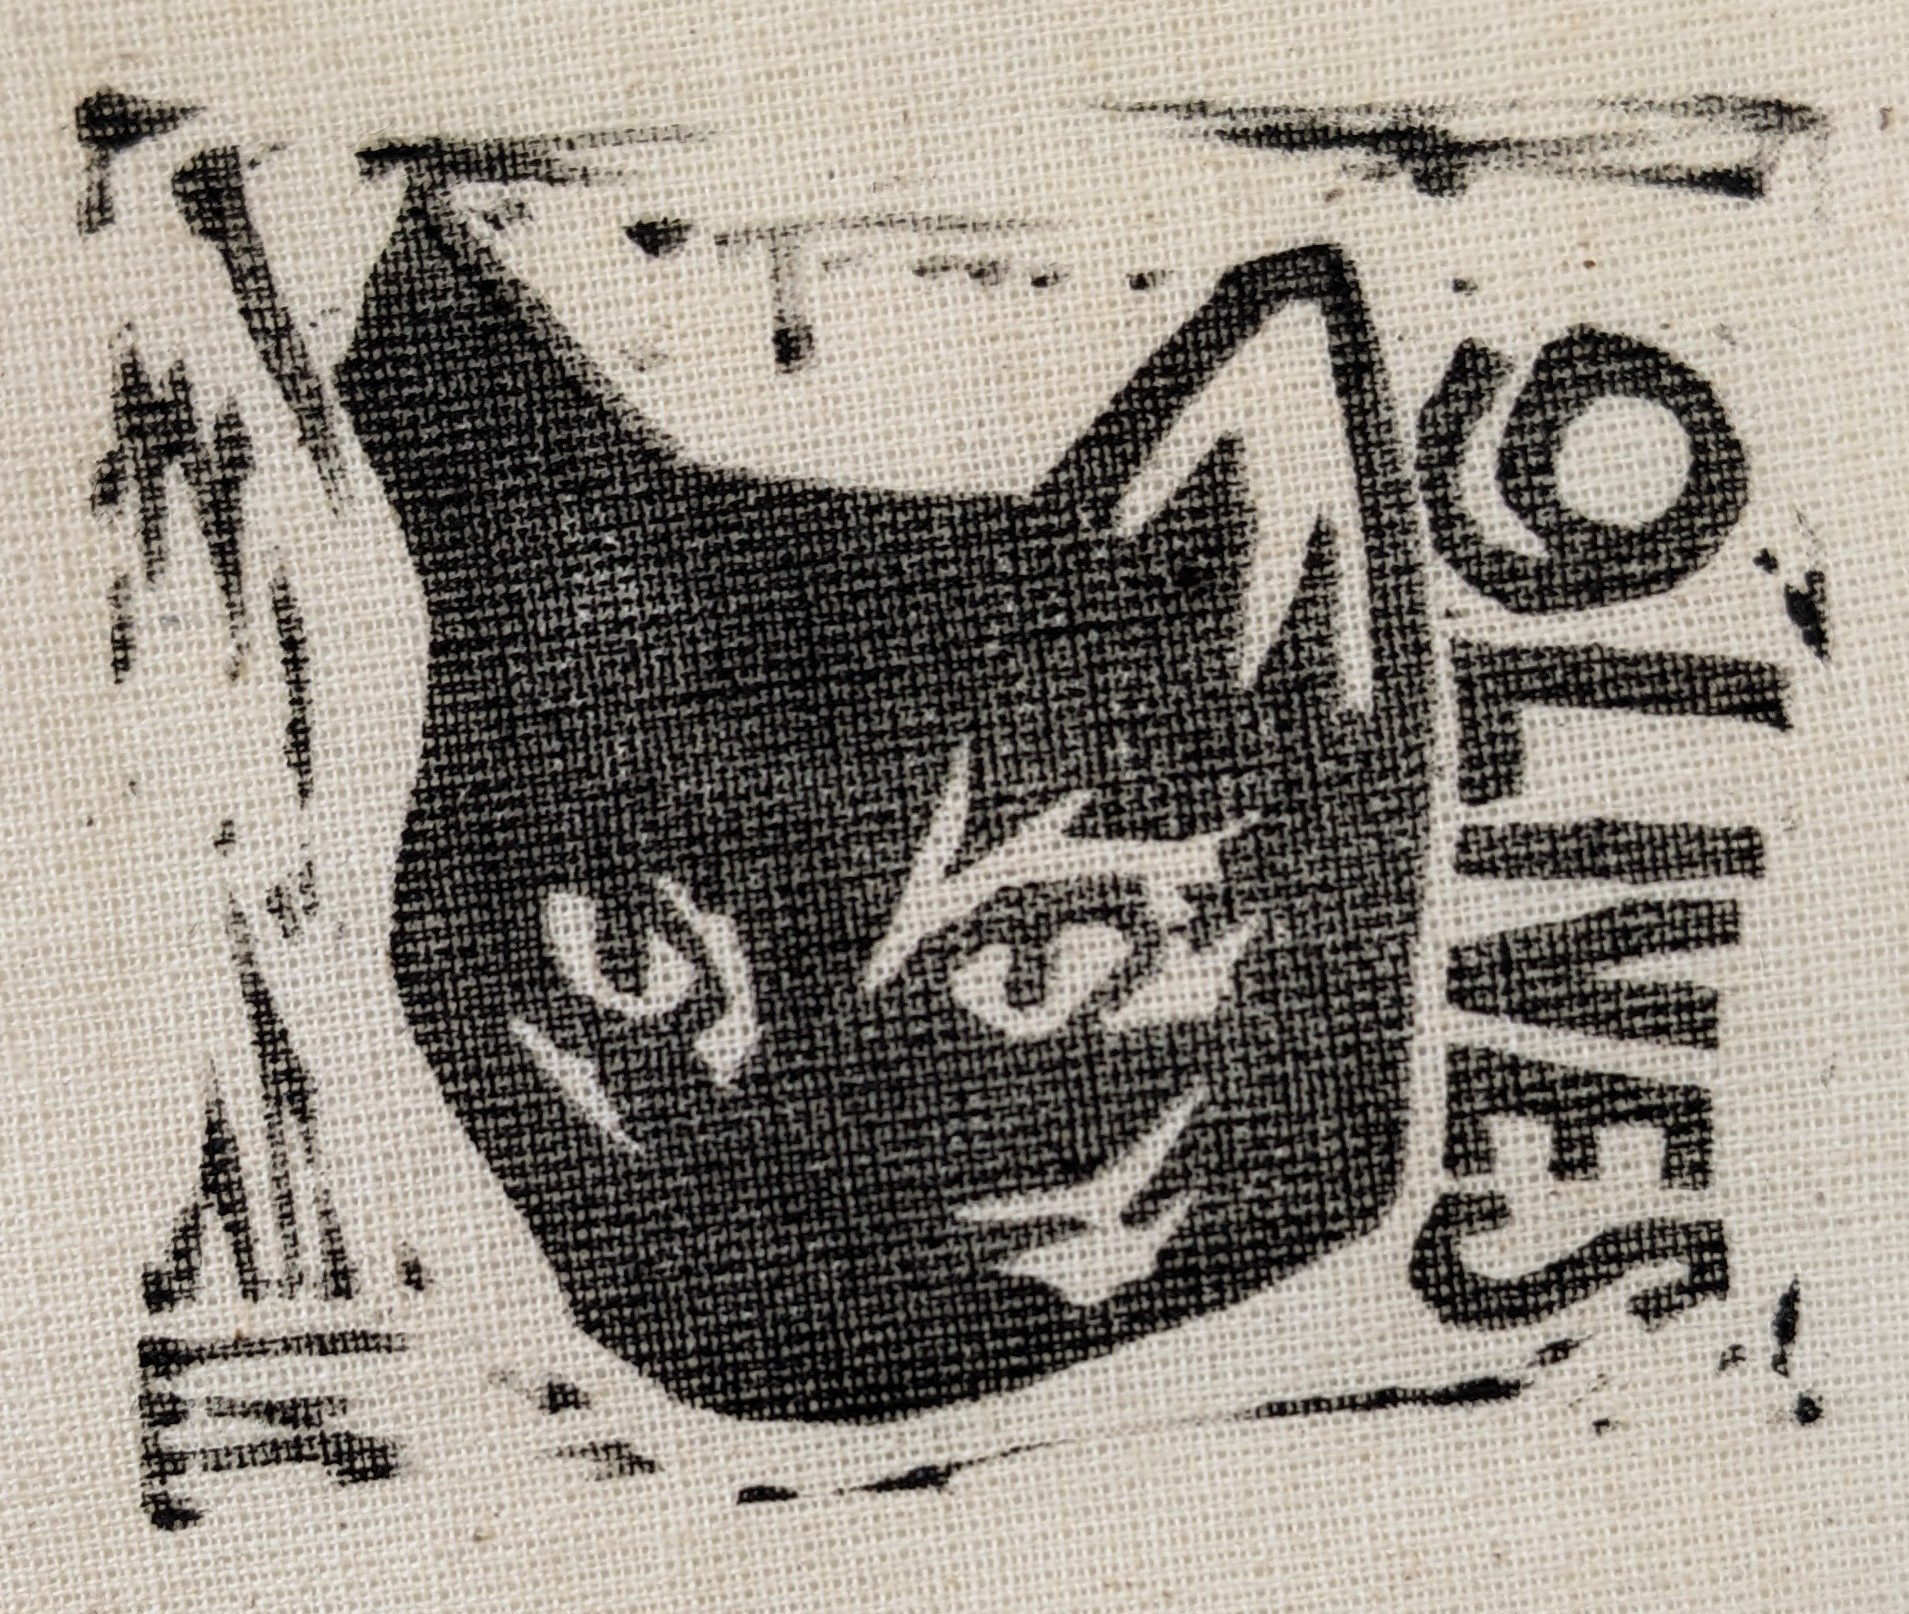 A black lino print on light beige fabric of a black cat's head with printed text beside it reading '9 lives'.